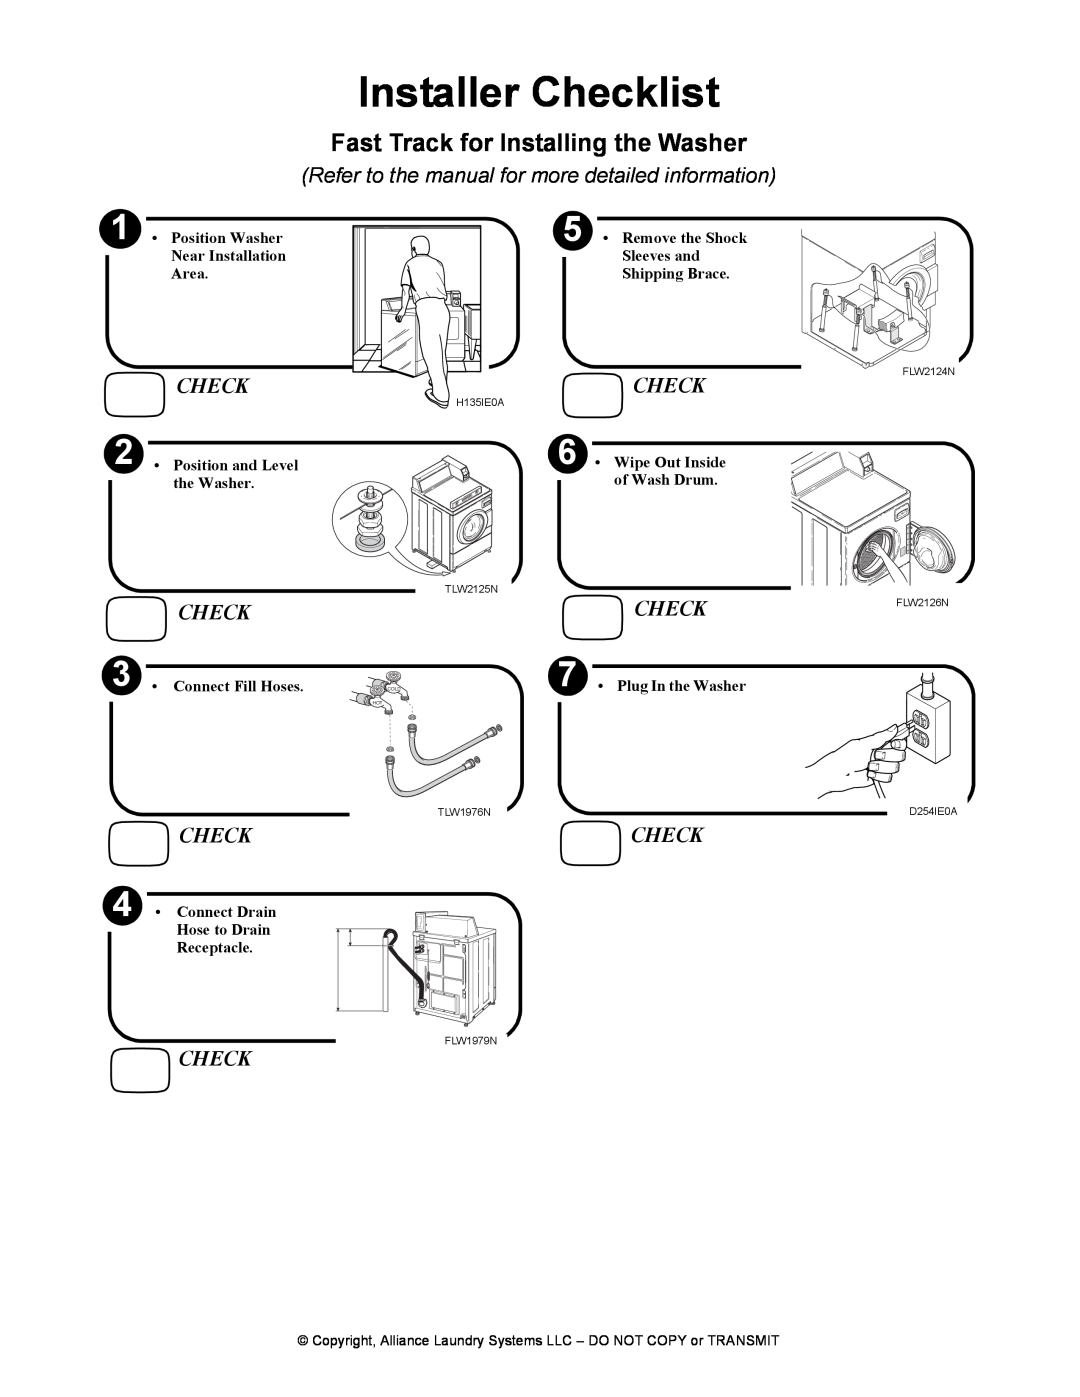 Alliance Laundry Systems FLW1526C manual Installer Checklist, Fast Track for Installing the Washer 